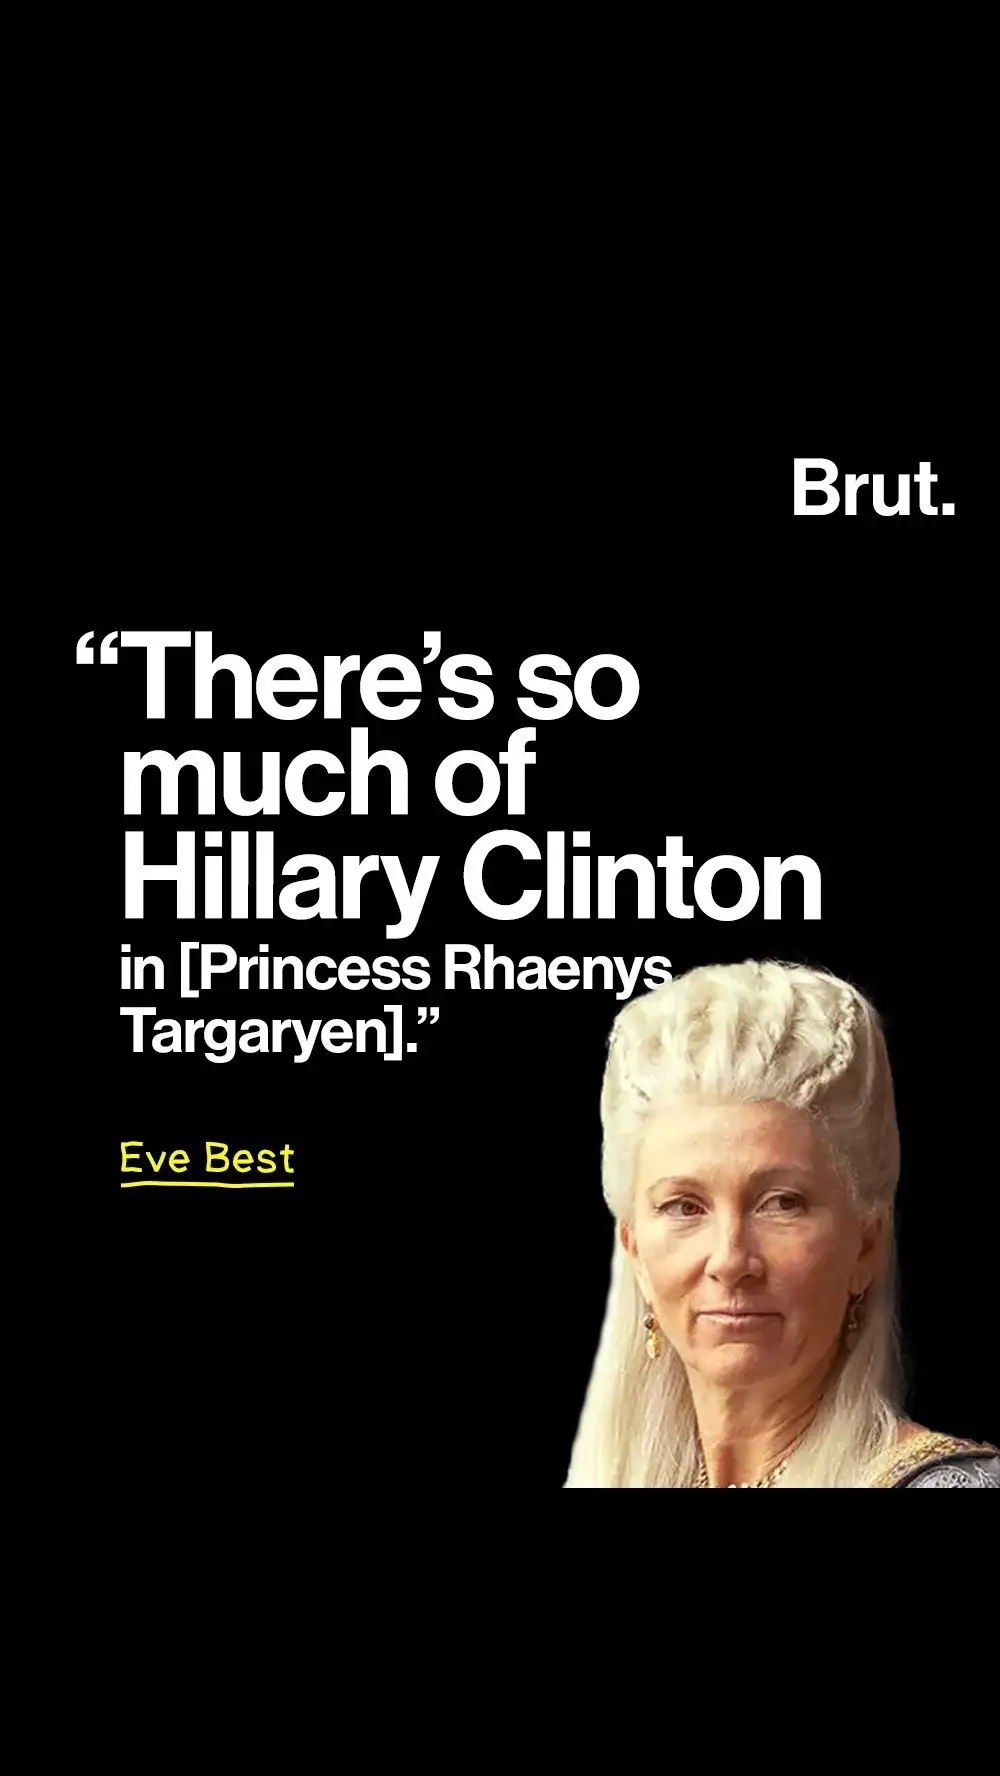 The actor, Eve Best, who plays the role of Princess Rhaenys Targaryen in HBO’s House of the Dragon, recalled when one of the executive producers and lead writers of the show, Sara Hess, told her that her character embodied how Hilary Clinton “navigated her role/non-role and maintained her dignity, self-respect and leadership” in the aftermath the 2016 election and that she felt that this is the path that her character, Rhaenys, was treading.  #HOD #targaryen #gameofthrones #houseofthedragon 